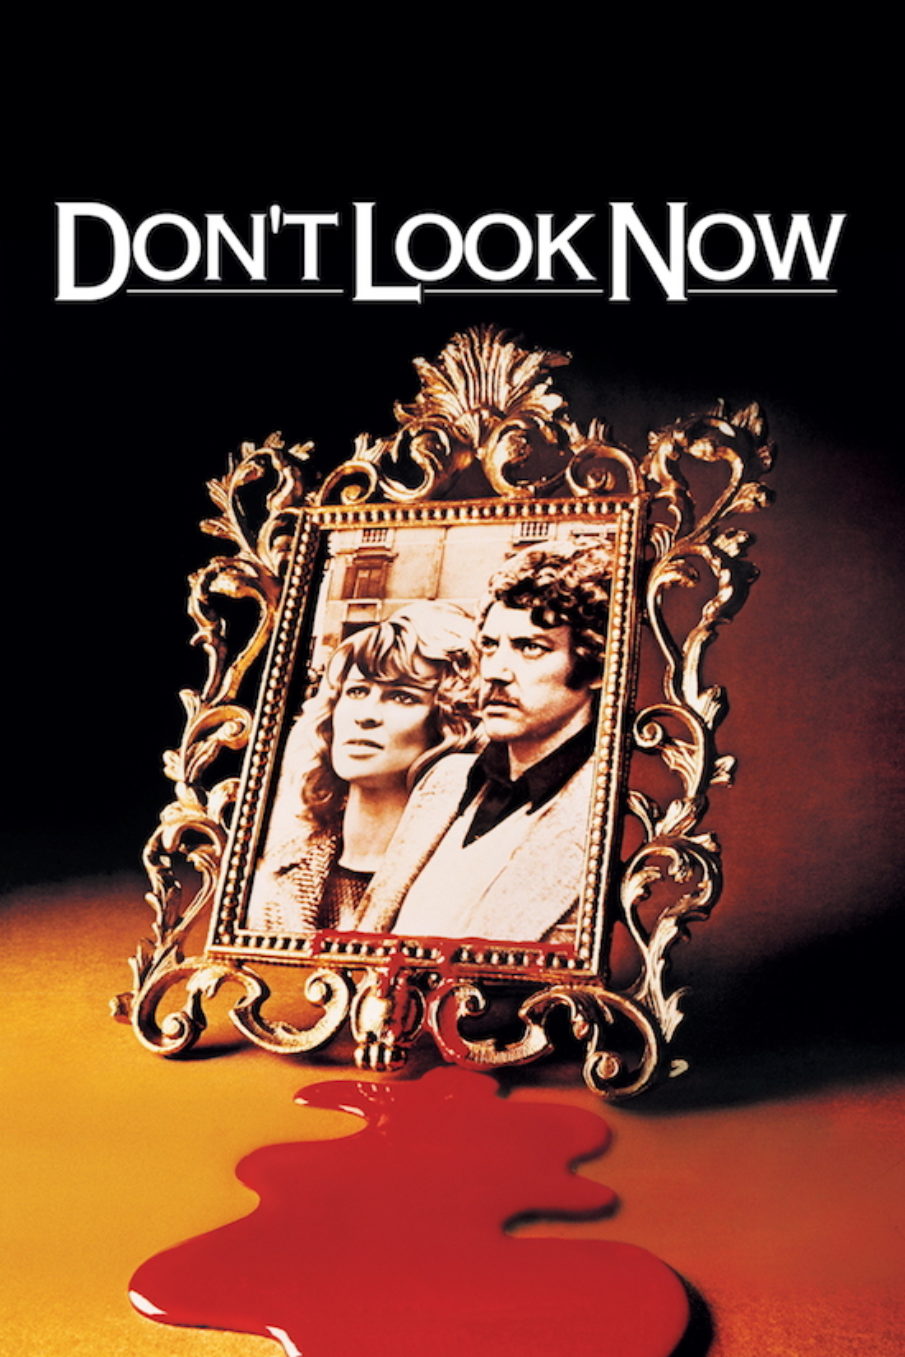 Don’t Look Now (1973) – 31 Days of Halloween